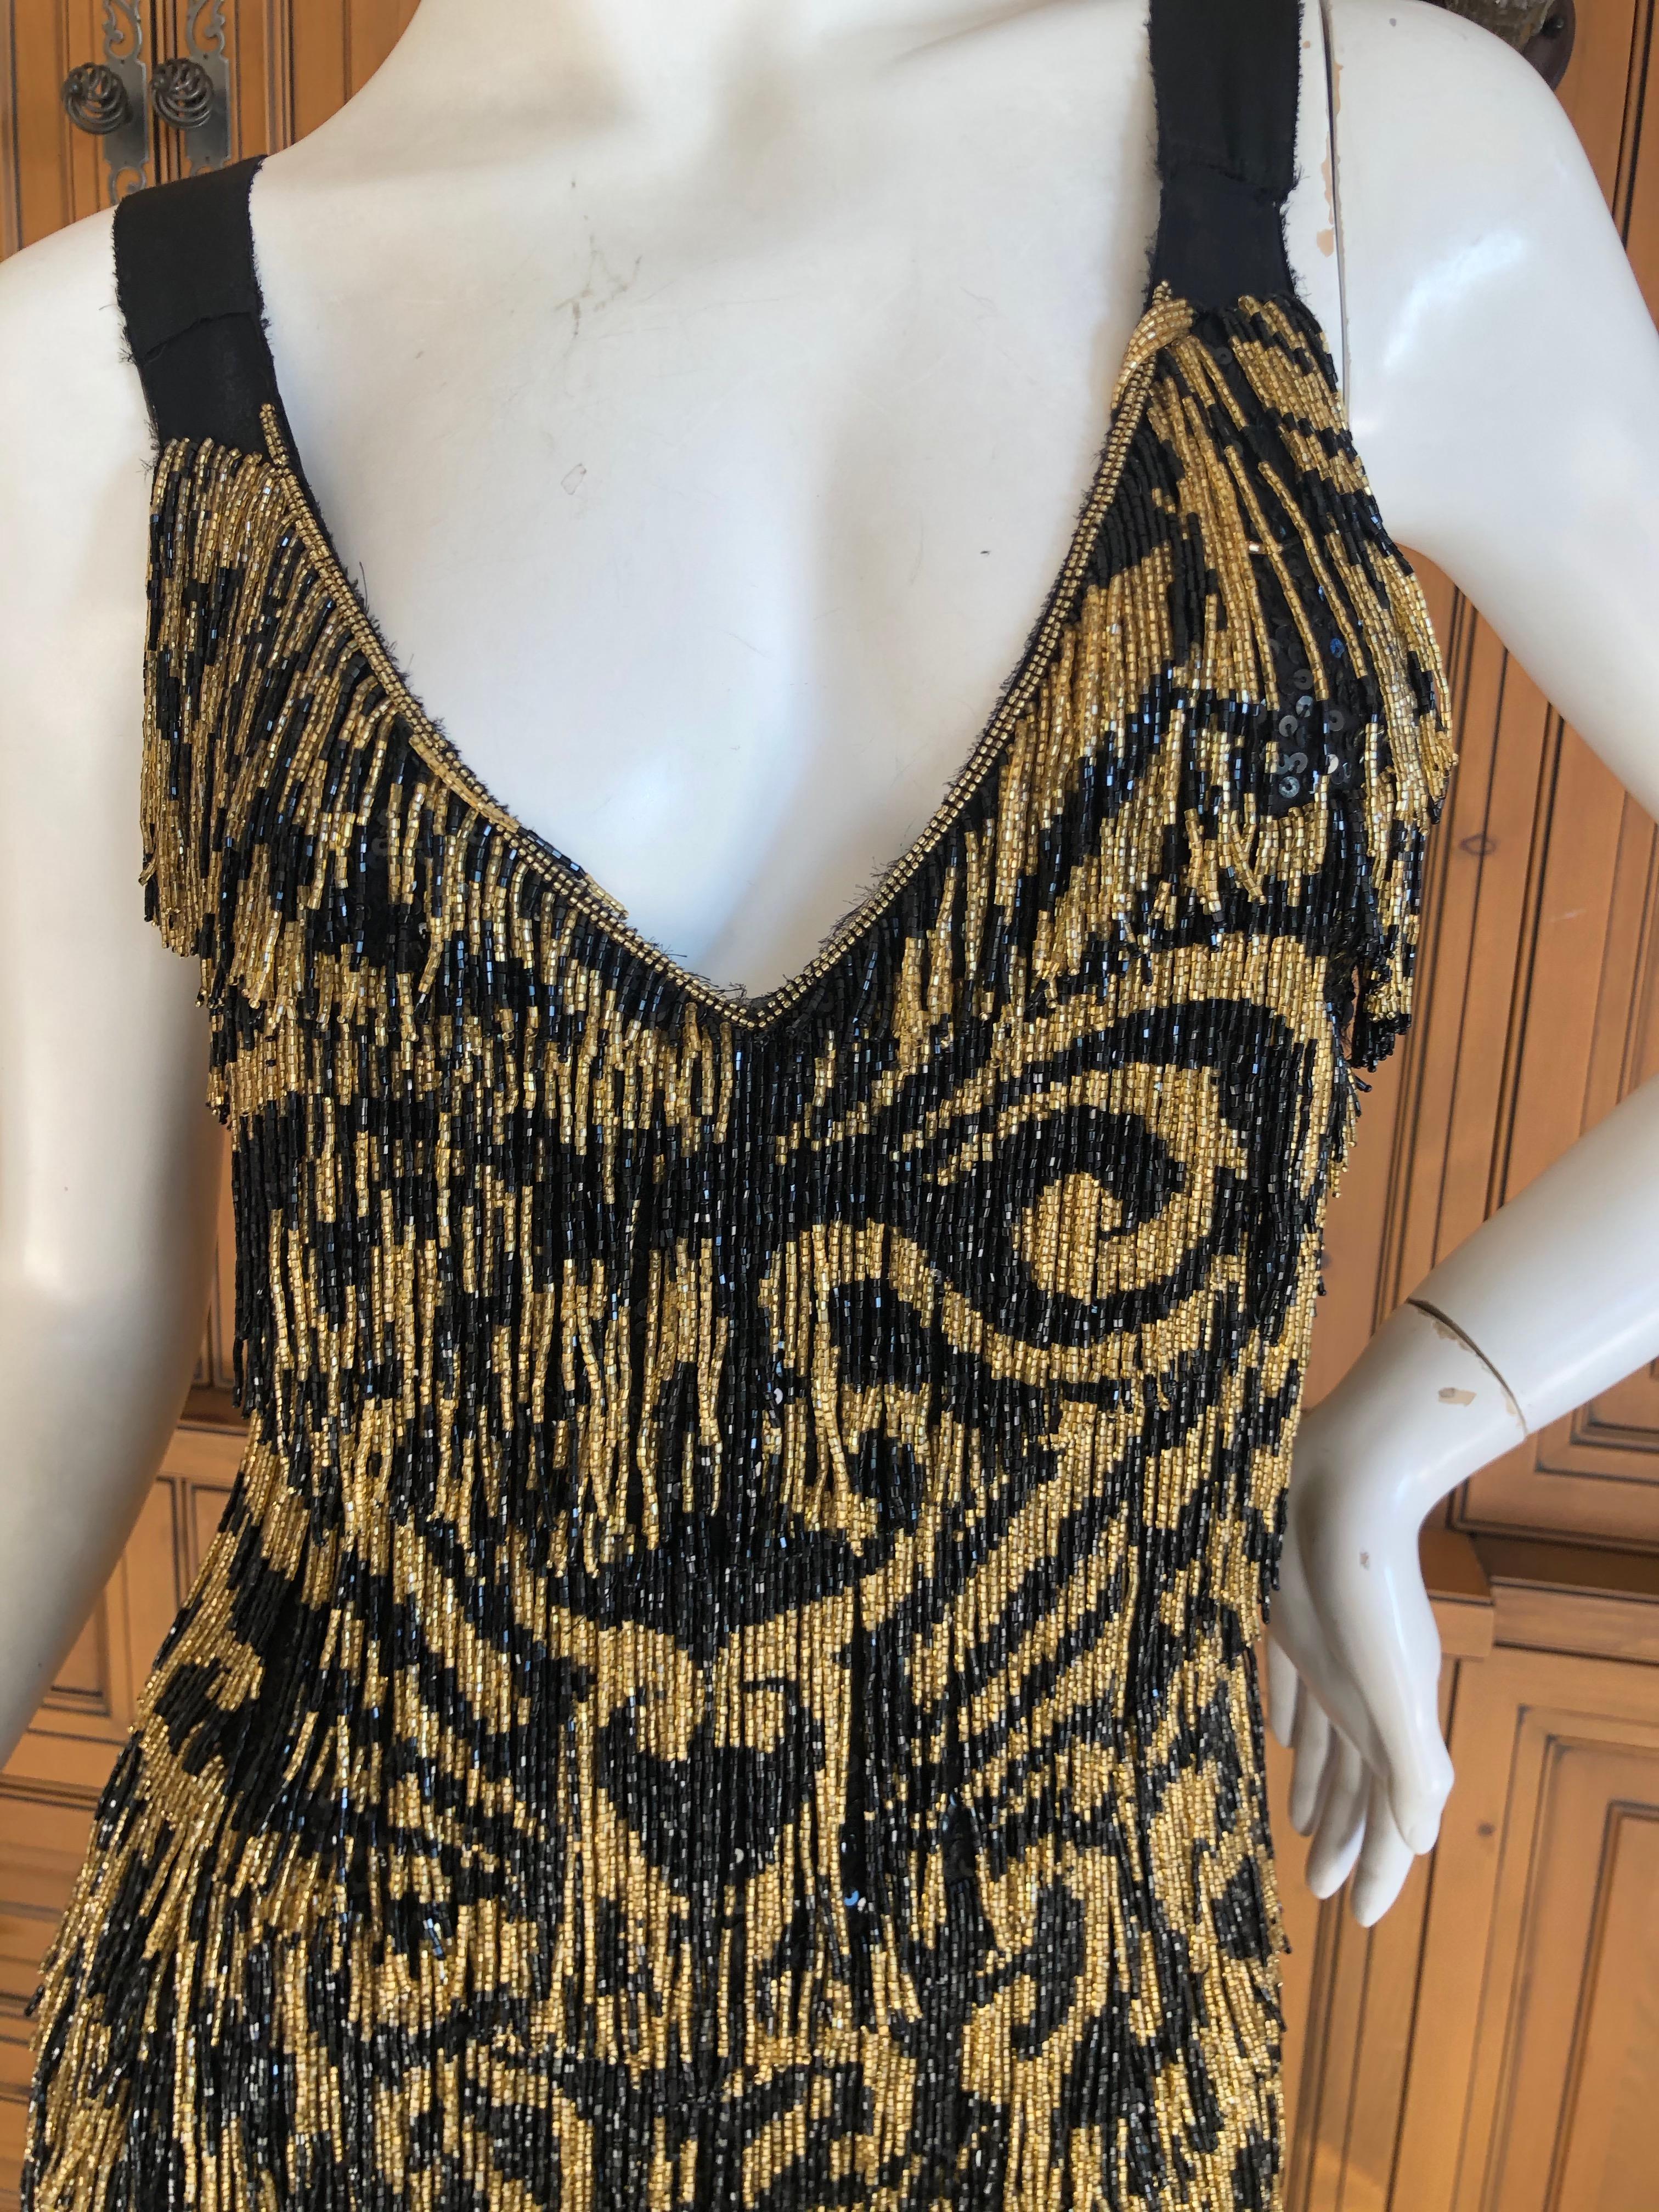 Emilio Pucci Flapper Style Black & Gold Beaded Fringe Mini Dress.
 WOW , this is so fun. 
These are glass beads, and this weighs a lot, so not for the faint of heart.
Size 40 / 6 US
 Bust 35